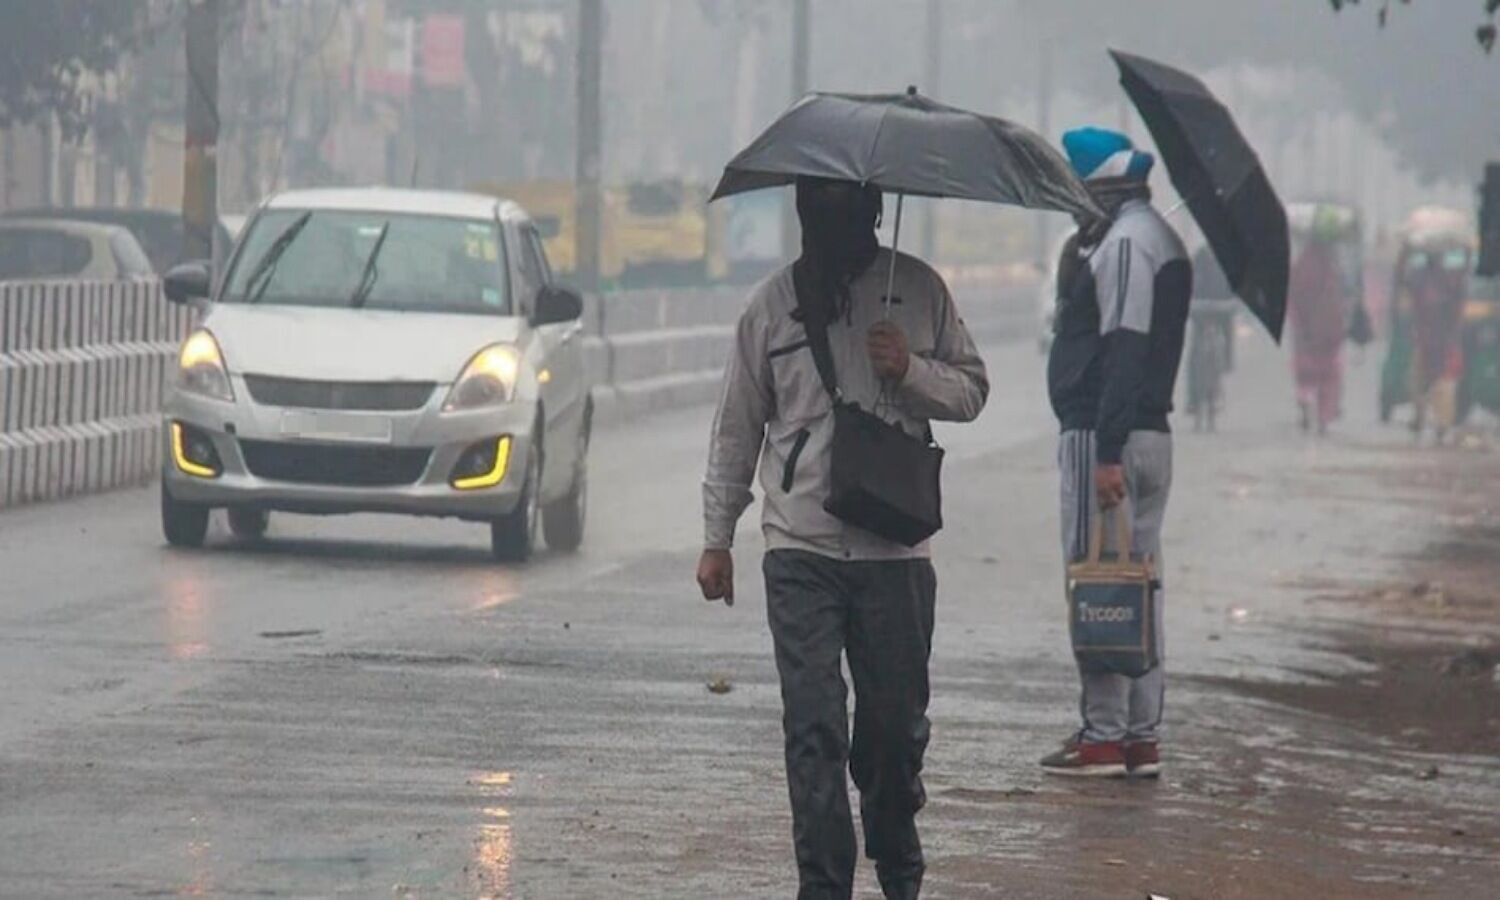 Weather Today: Chance of rain in UP and Bihar today, alert in Uttarakhand and Himachal